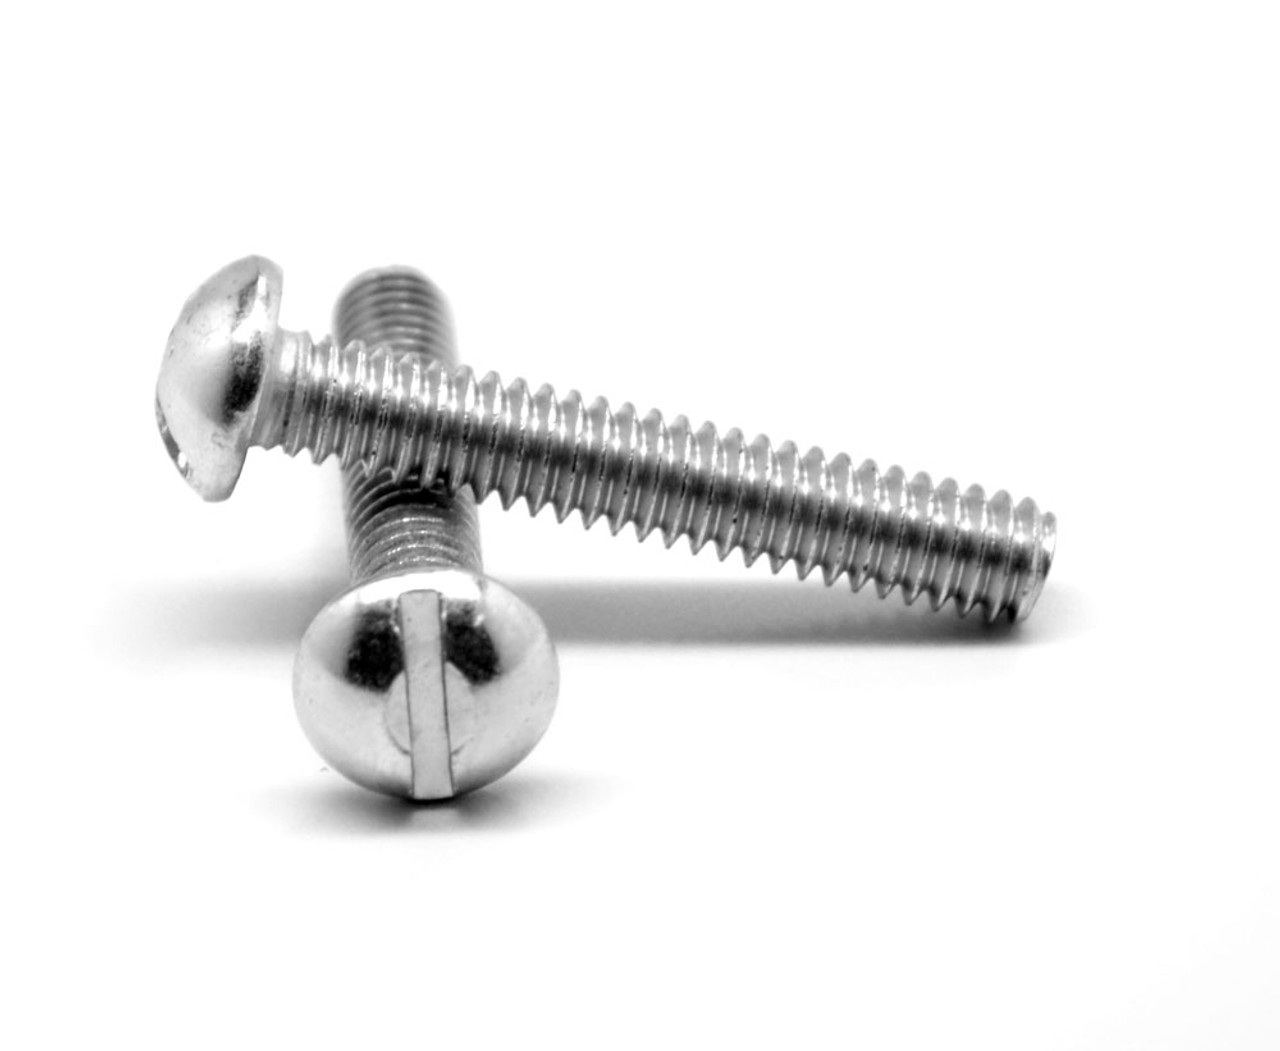 1/2"-13 x 6" (FT) Coarse Thread Machine Screw Slotted Round Head Low Carbon Steel Zinc Plated